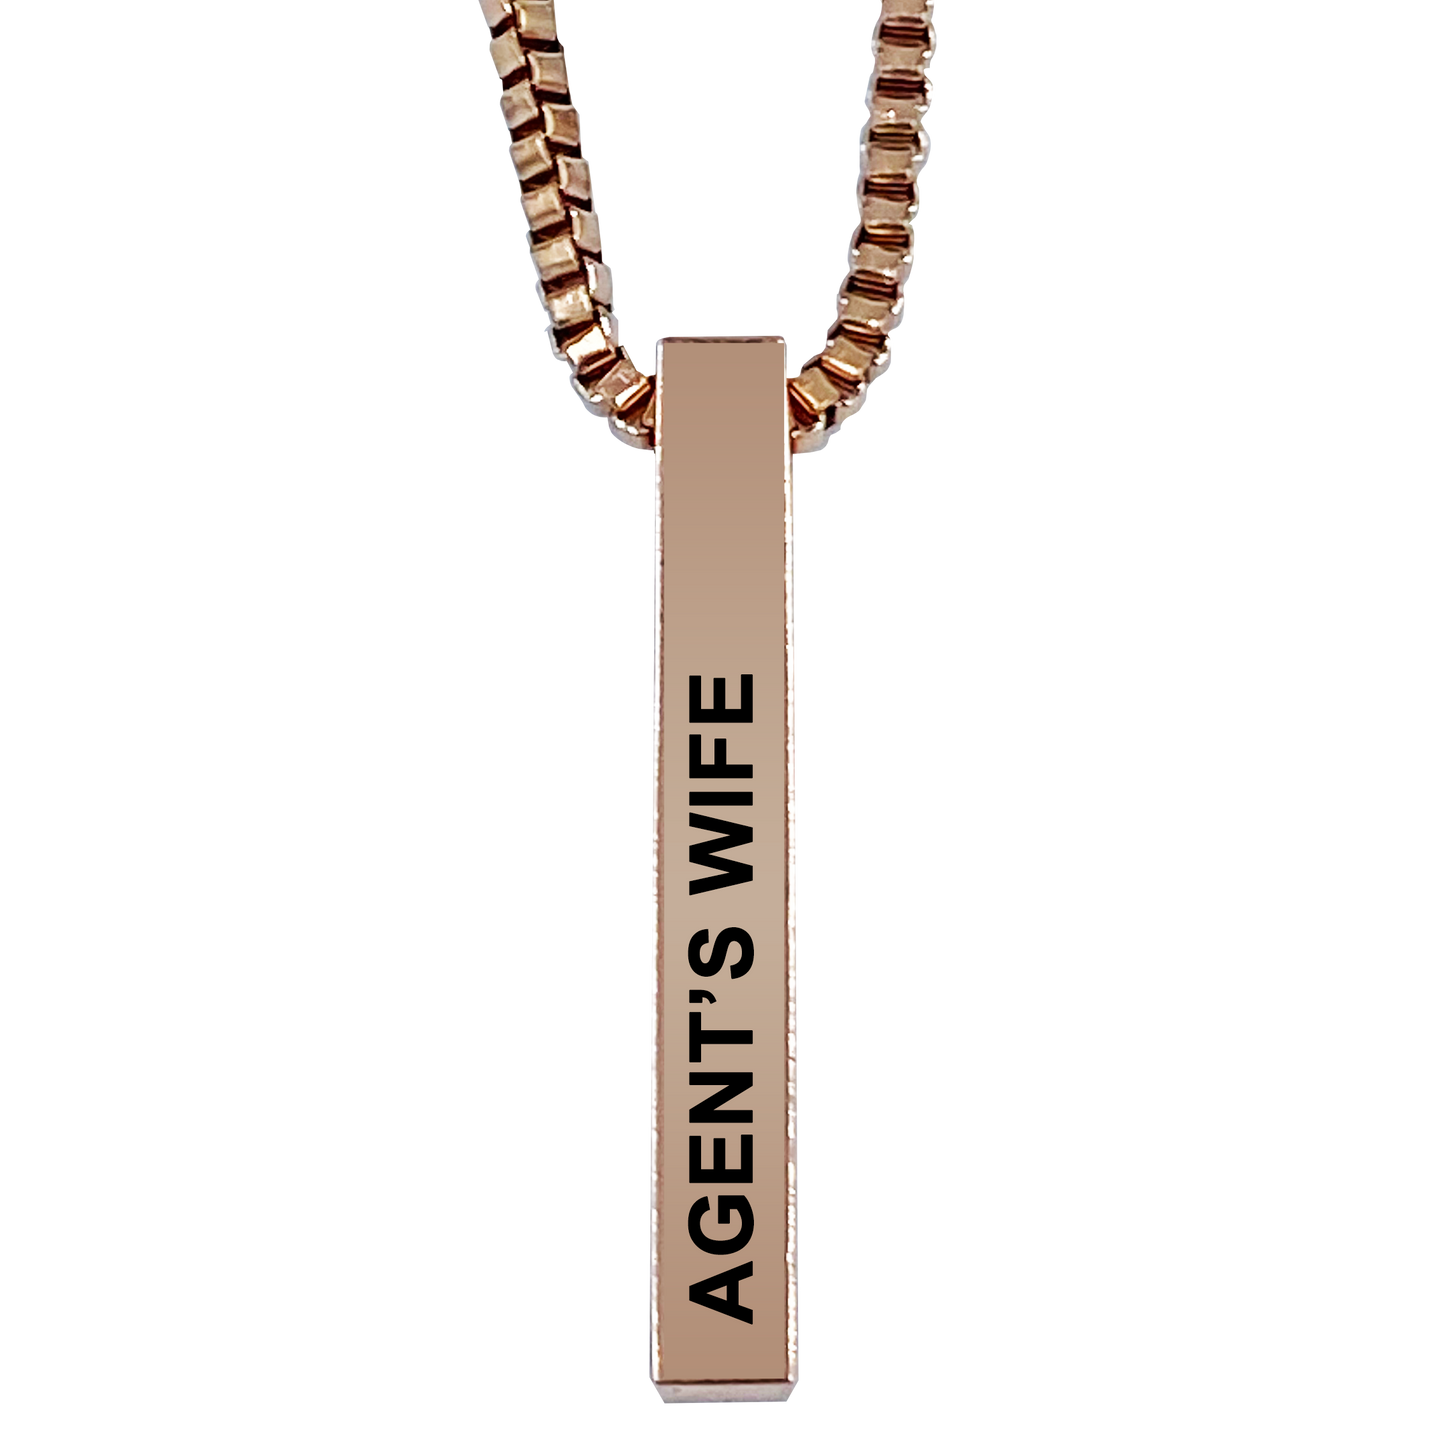 Agent's Wife Rose Gold Plated Pillar Bar Pendant Necklace Gift Mother's Day Christmas Holiday Anniversary Police Sheriff Officer First Responder Law Enforcement